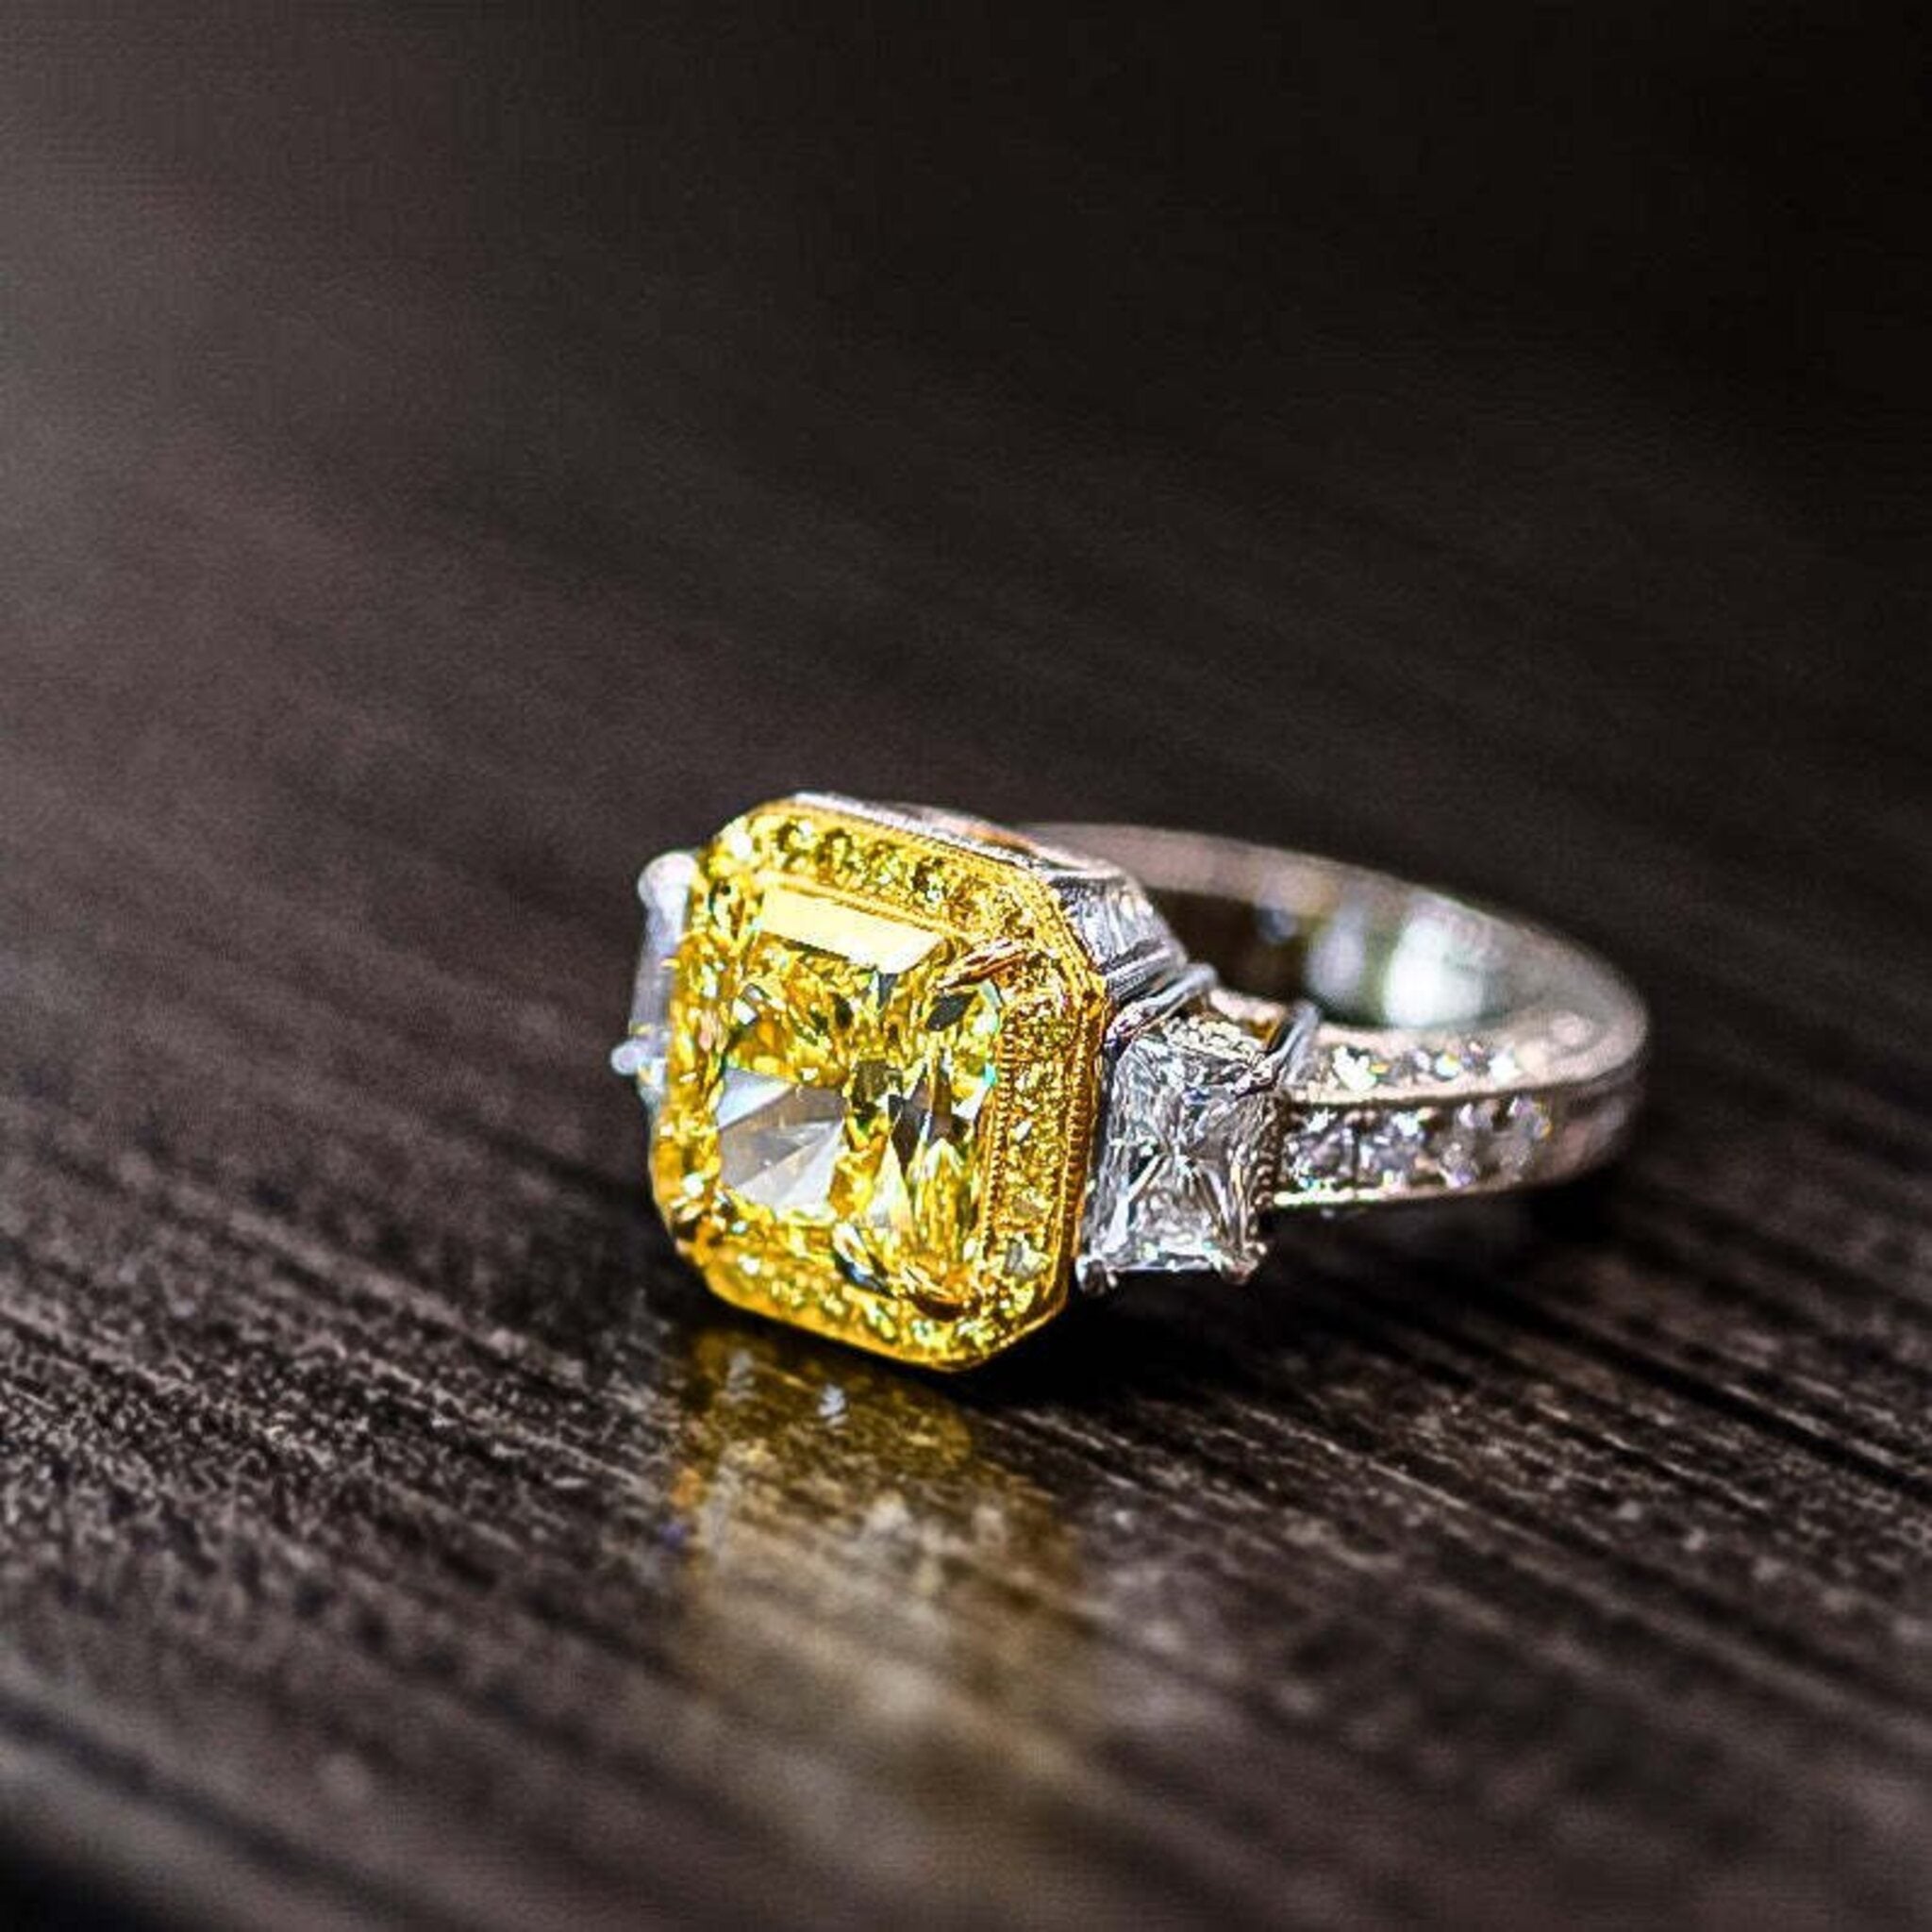 Tiffany True® Engagement Ring with a Cushion-cut Yellow Diamond in 18k  Yellow Gold